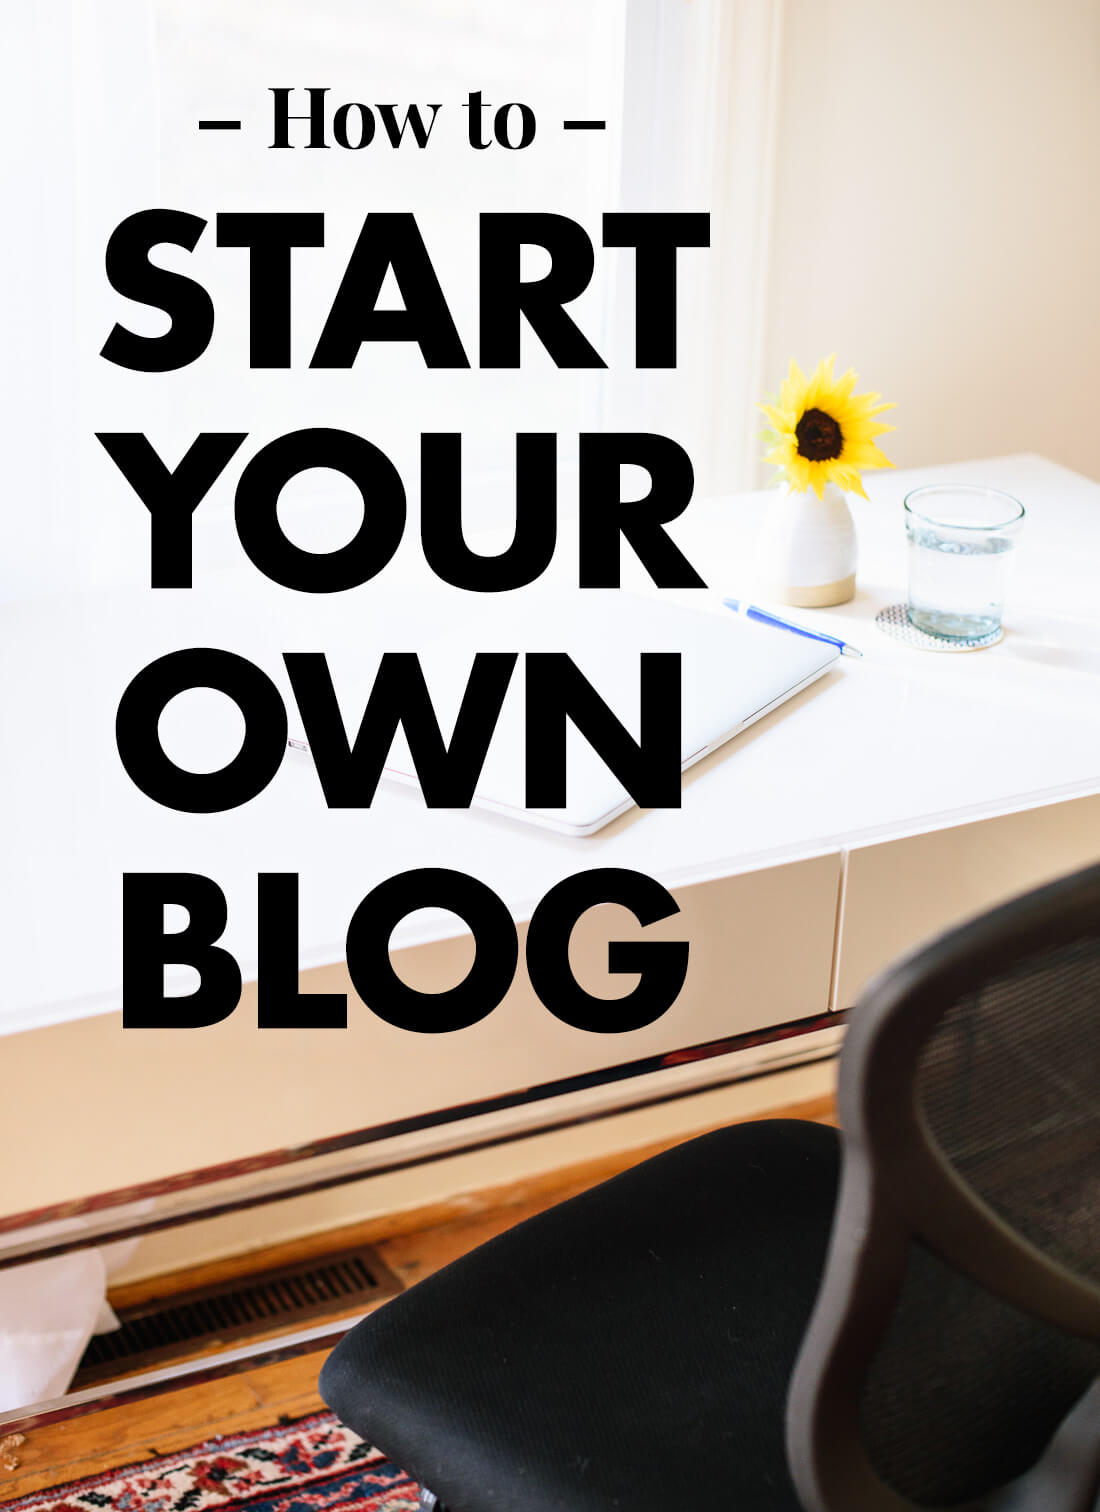 Do you want to start your own blog? Here's my step-by-step guide that will get your beautiful new blog up and running ASAP! cookieandkate.com